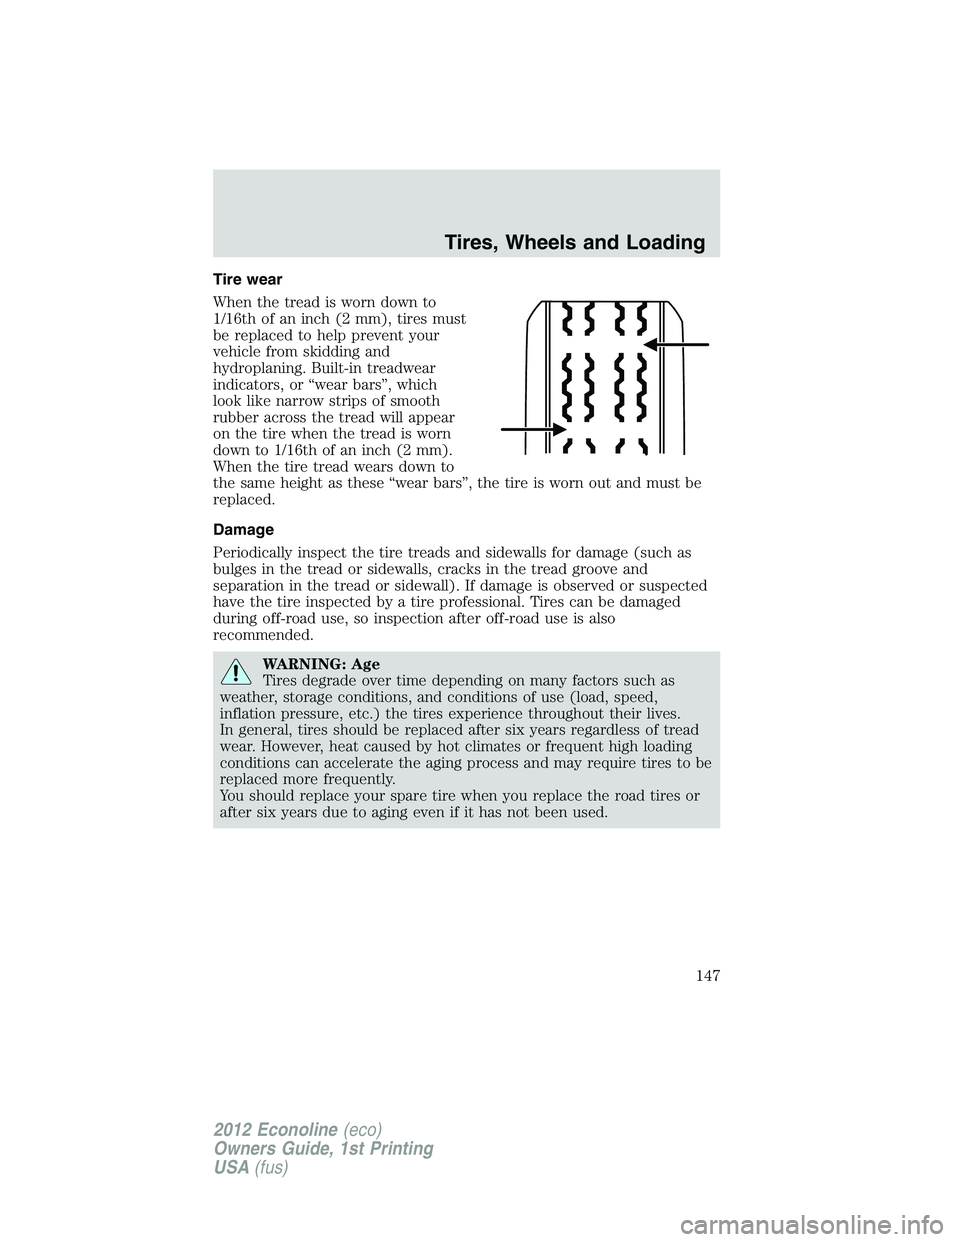 FORD E150 2012  Owners Manual Tire wear
When the tread is worn down to
1/16th of an inch (2 mm), tires must
be replaced to help prevent your
vehicle from skidding and
hydroplaning. Built-in treadwear
indicators, or “wear bars”